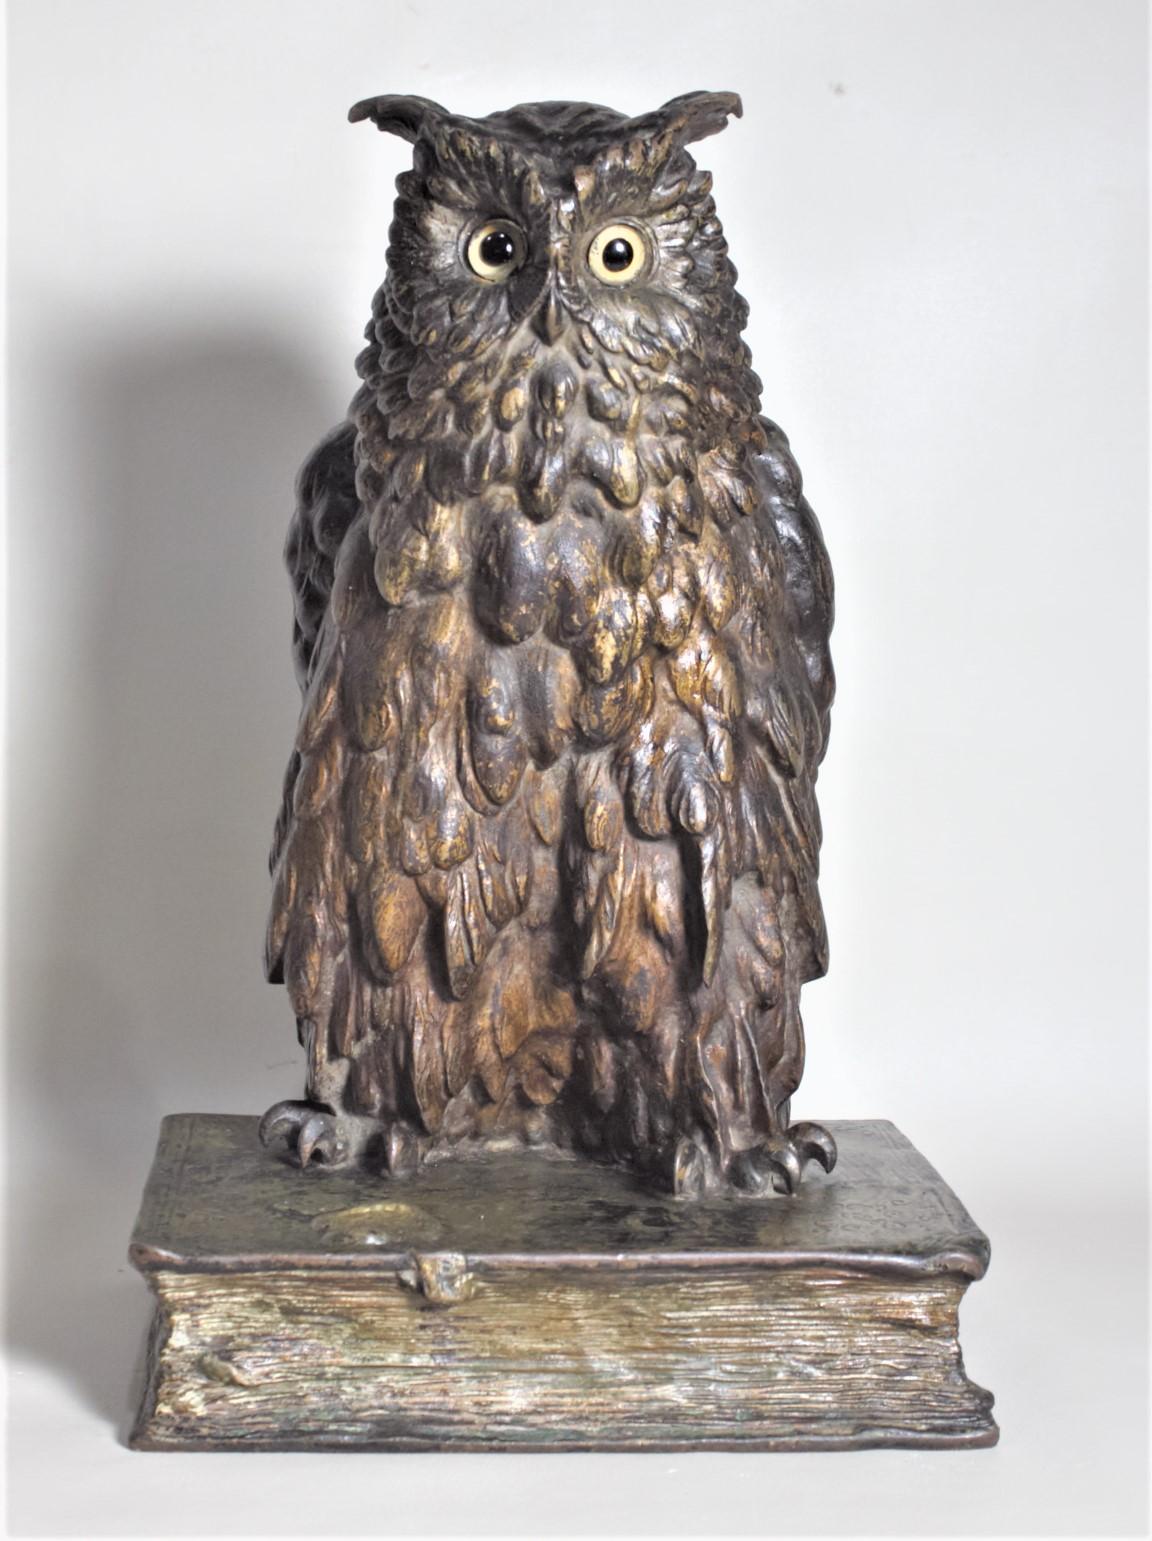 This large and substantial cast and cold-painted bronze sculpture of an owl standing on a book was made in Austria in circa 1880 in the period Victorian style. This sculpture is very well executed from all sides, showing considerable details to the